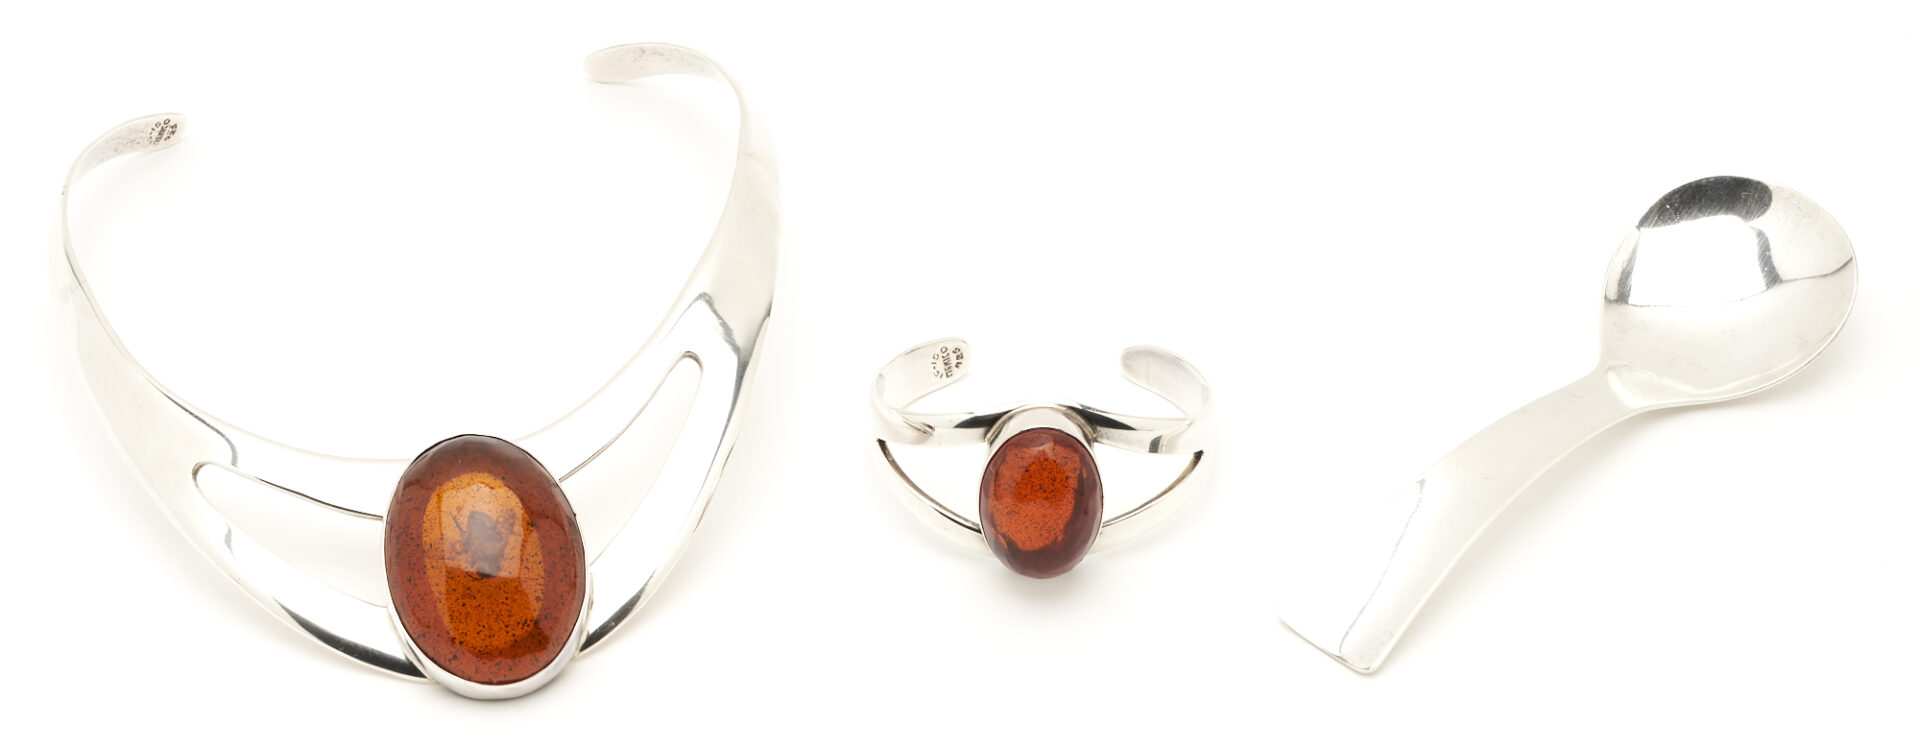 Lot 763: 6 pcs. Ass. Sterling Silver, incl. David-Andersen Enameled & Mexican Baltic Amber Jewelry